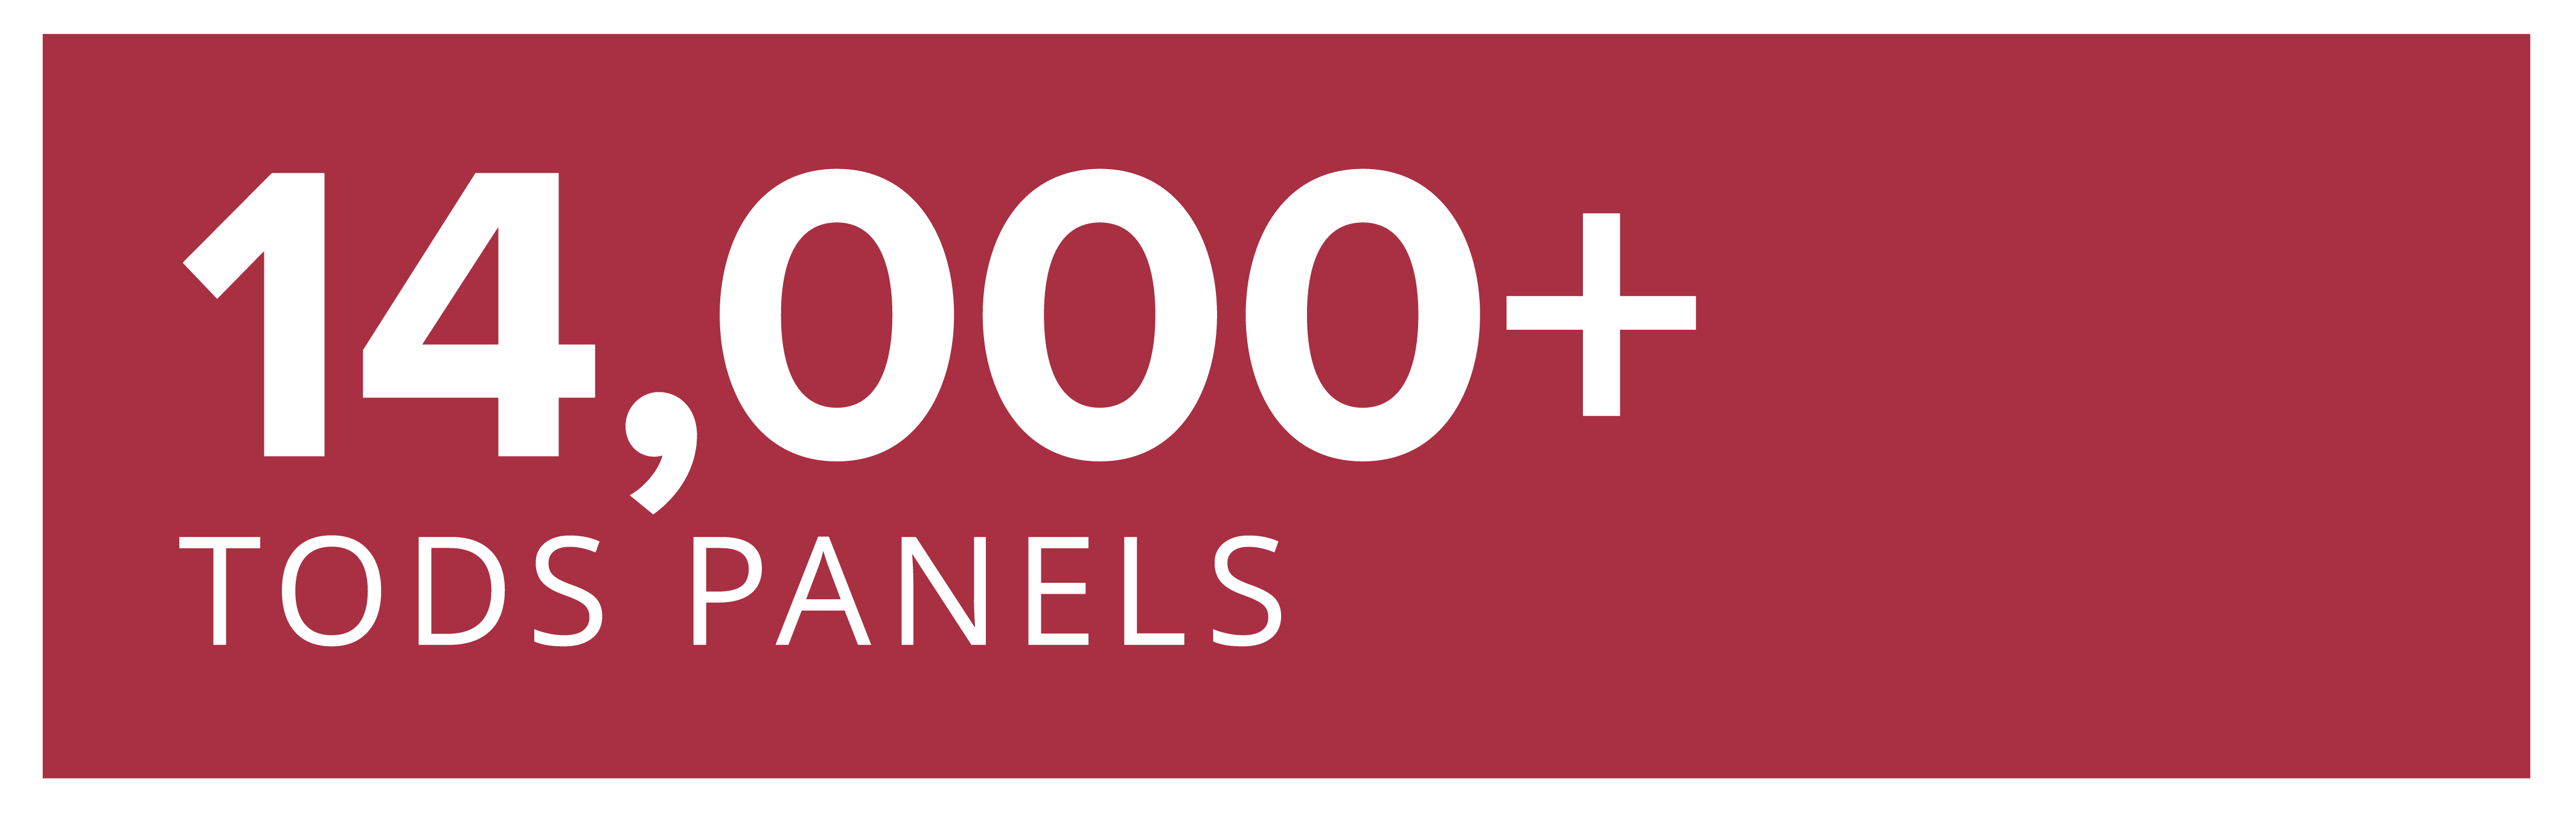 14,000+ TODS Panels